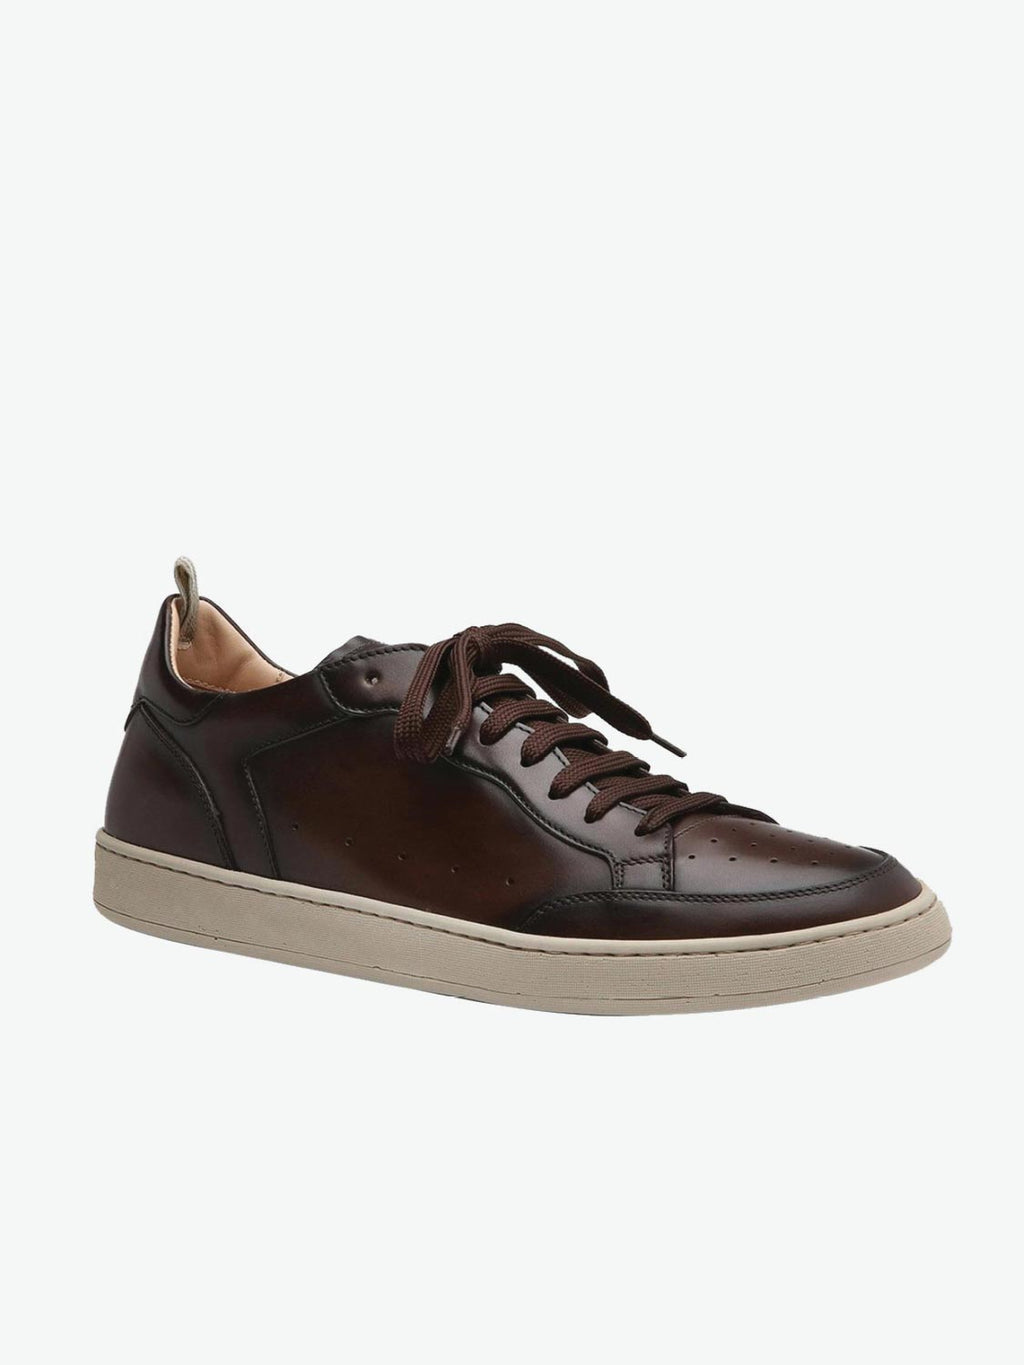 OFFICINE CREATIVE: Sneakers men - Black | OFFICINE CREATIVE sneakers  ACELUX100 online at GIGLIO.COM